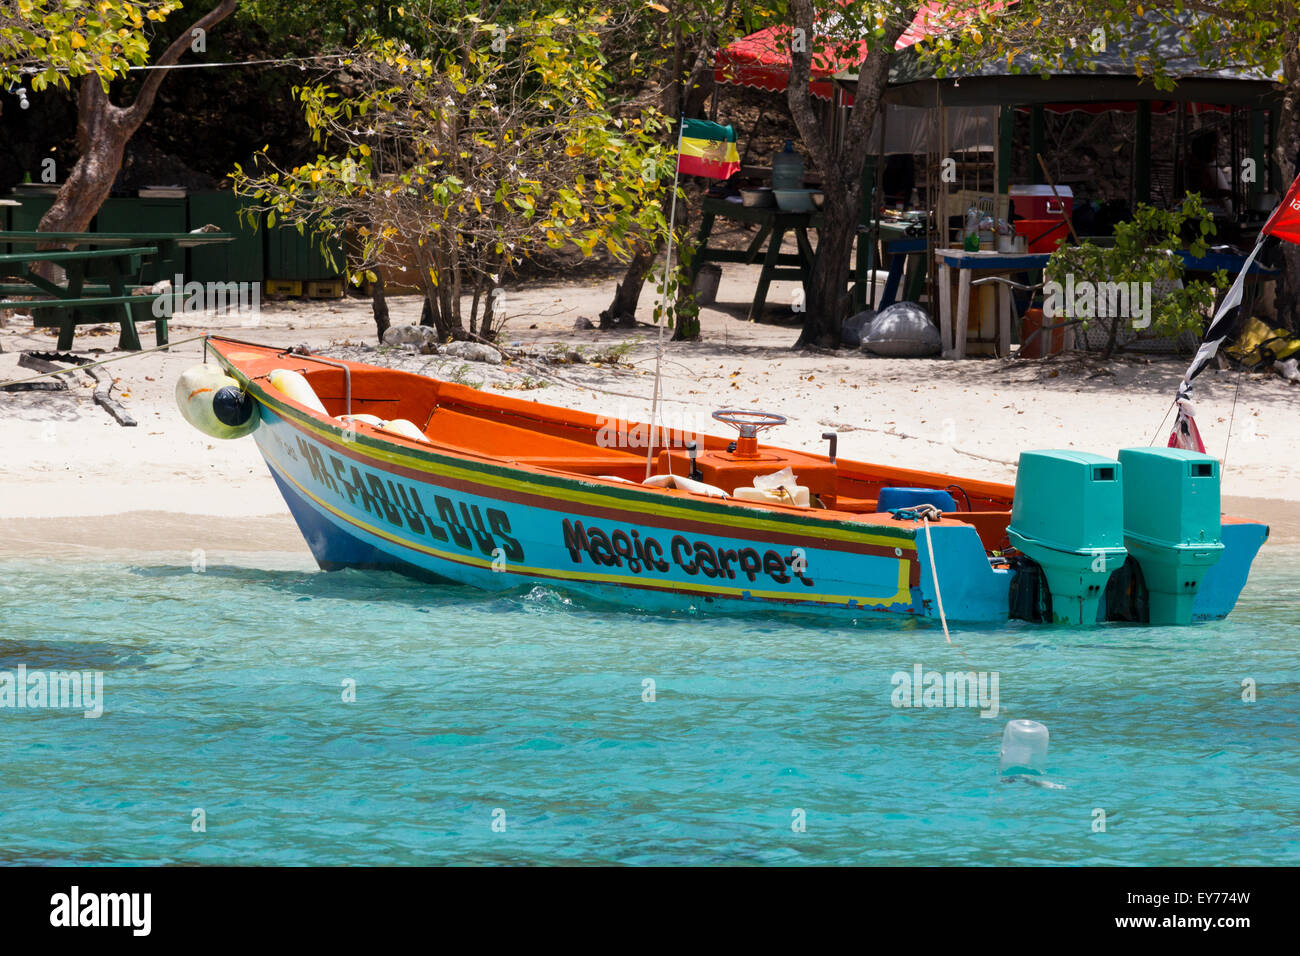 ‘Mr. Fabulous’; Water Taxi Moored on a Tranquil Beach at Petit Bateau with Turquoise Caribbean Sea, Tobago Cays, Grenadines. Stock Photo